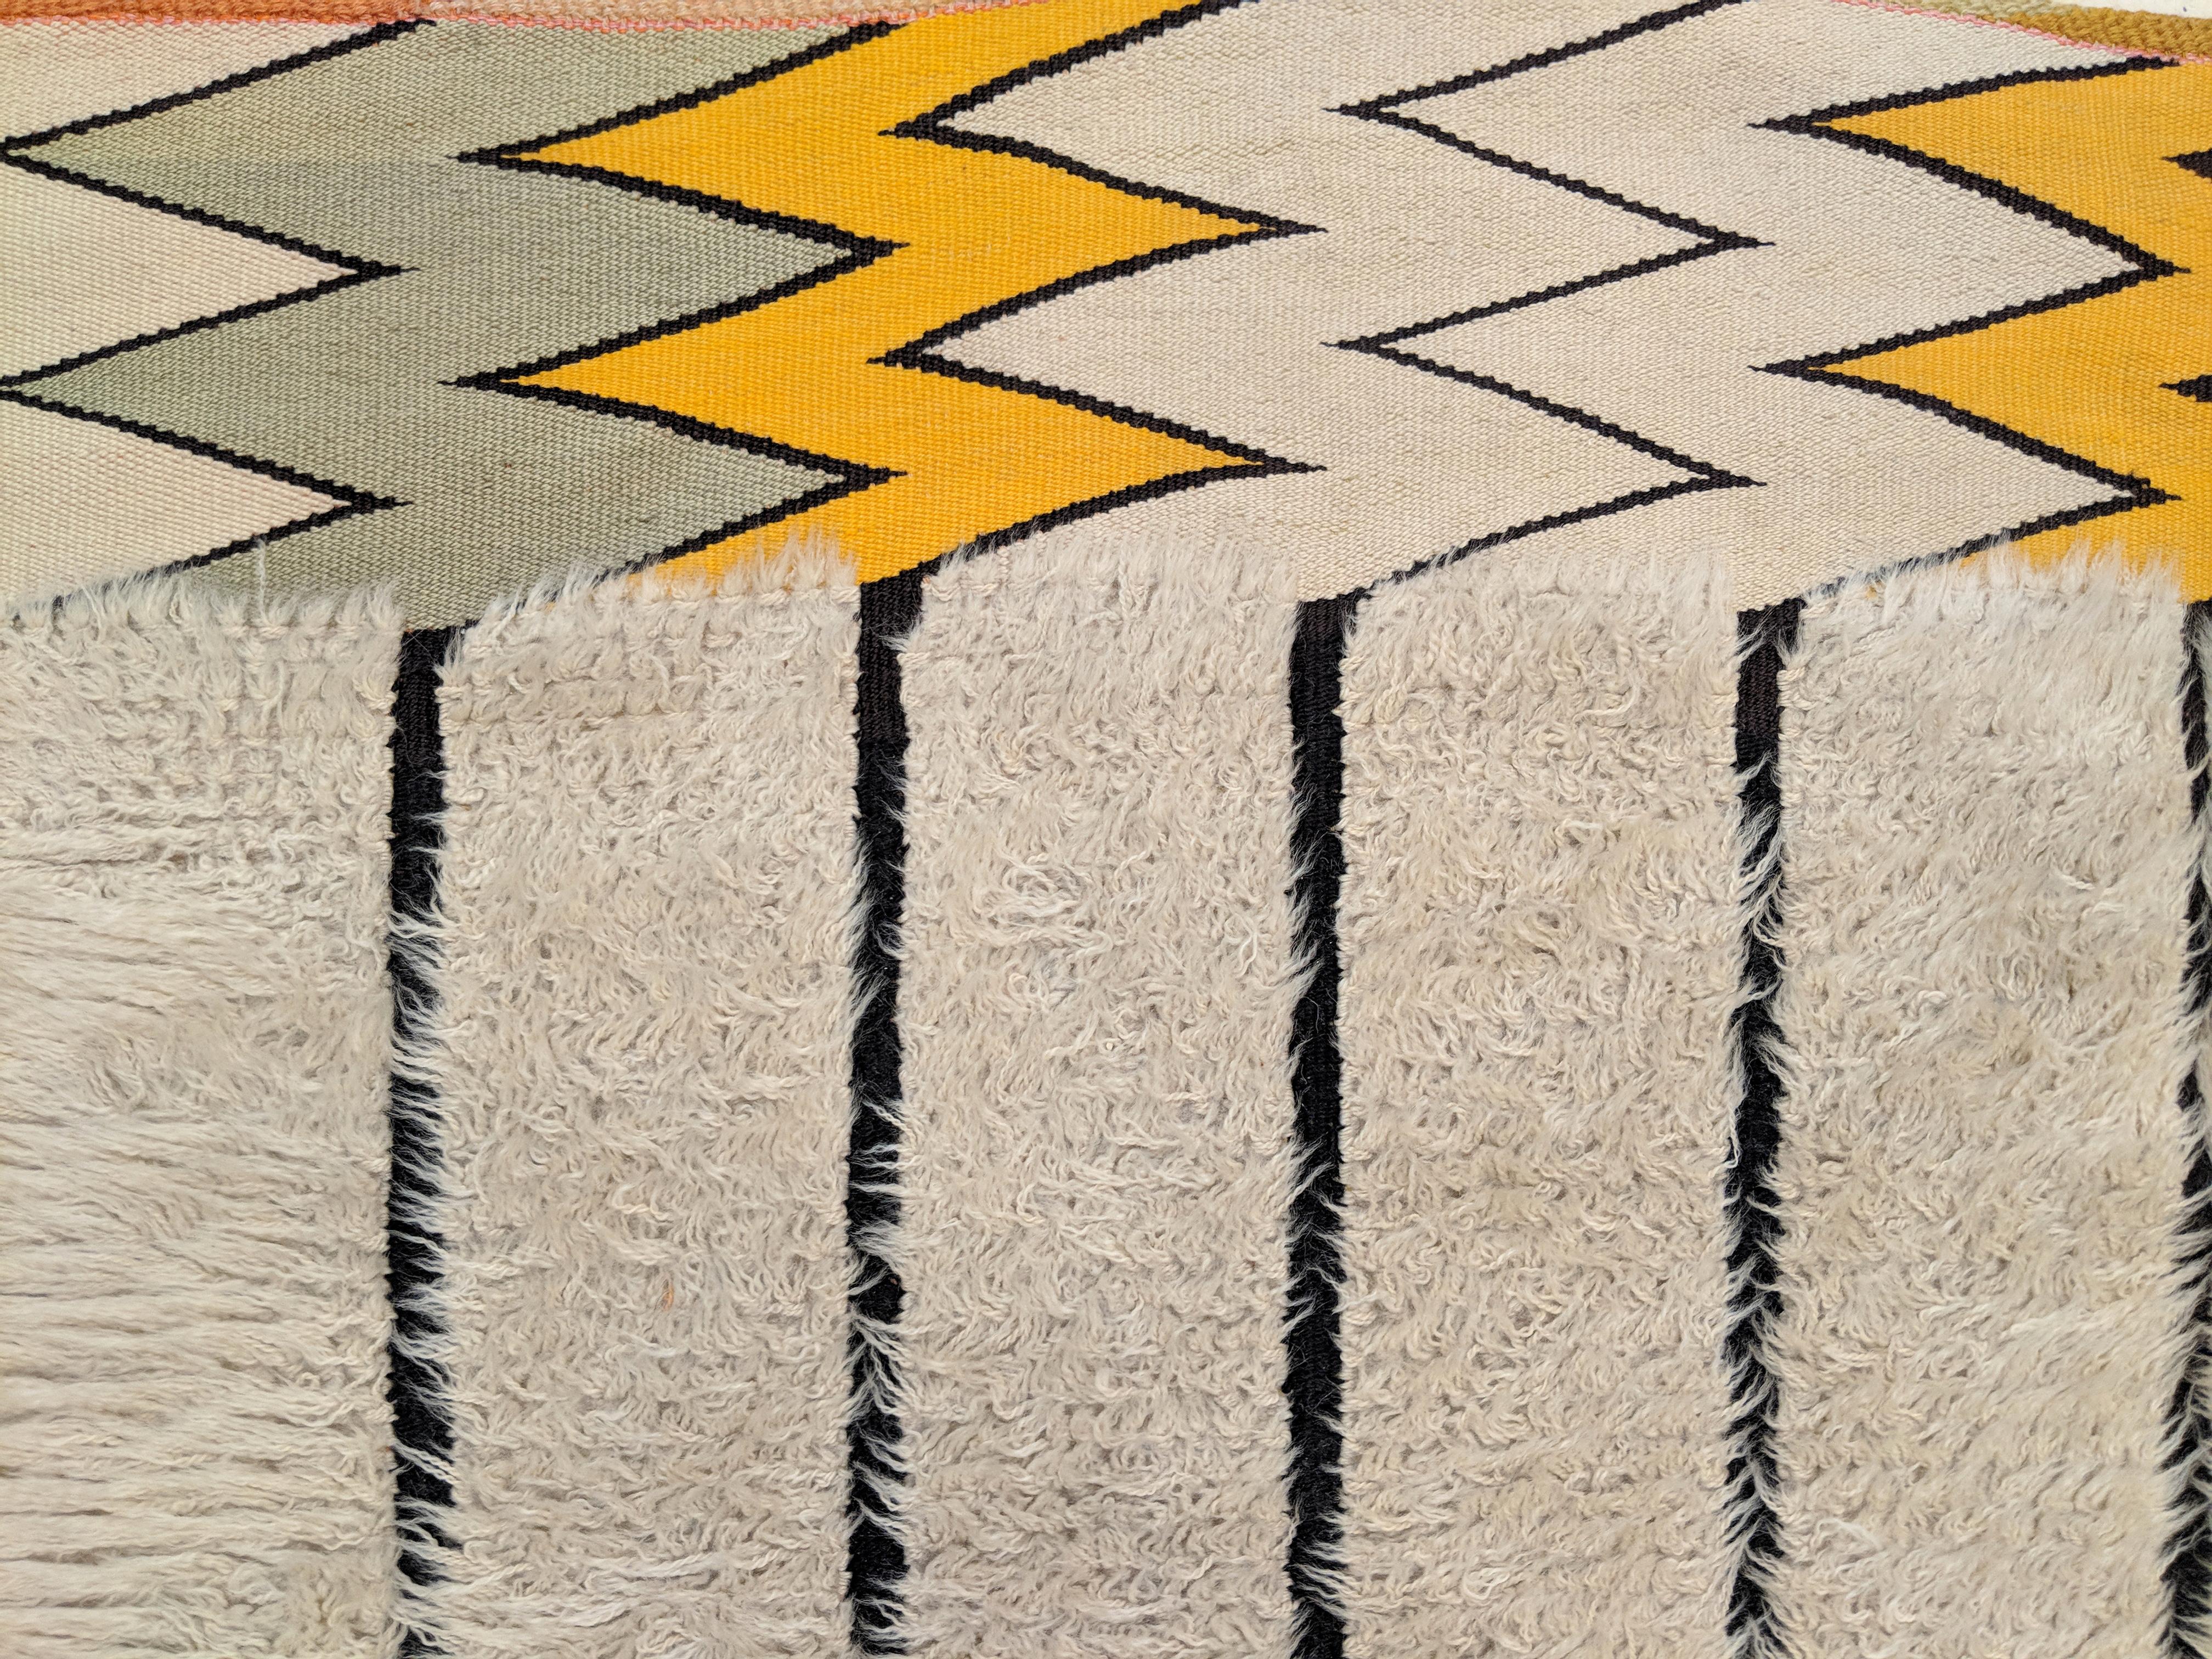 A very unusual Swedish pile rug with colour and design reminiscent of Beni Ouarain Berber rugs, indicating that Moroccan carpets were influencing Scandinavian Modern design quite early on. Here the pattern of black parallel lines on an ivory